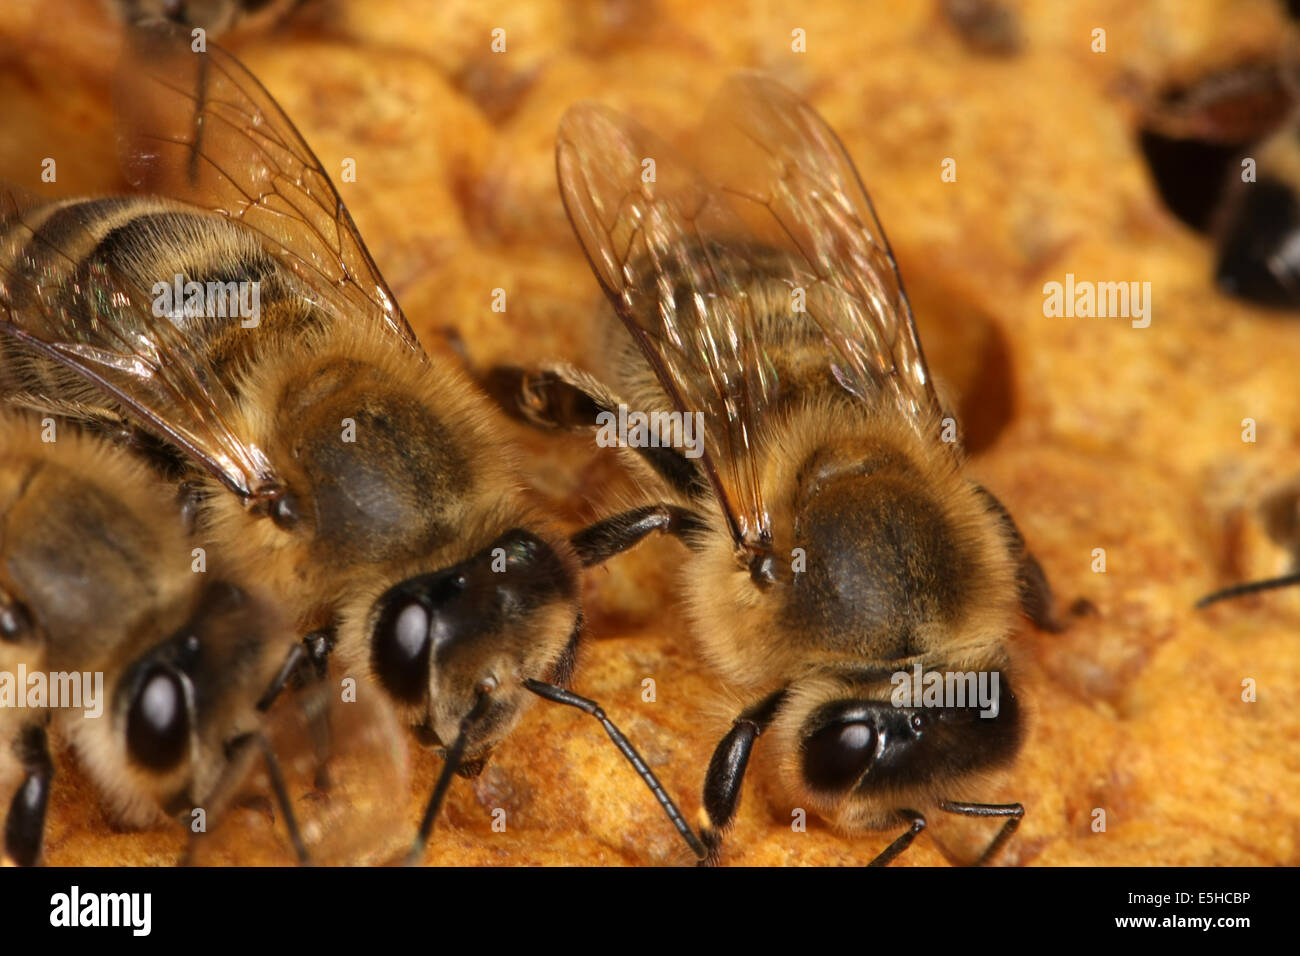 Bees on a brood comb with capped cells of the worker bees. Nine days after oviposition the brood cells are capped. The development from egg to the ready bee needs 21 days. Photo: Klaus Nowottnick Date: June 04, 2010 Stock Photo